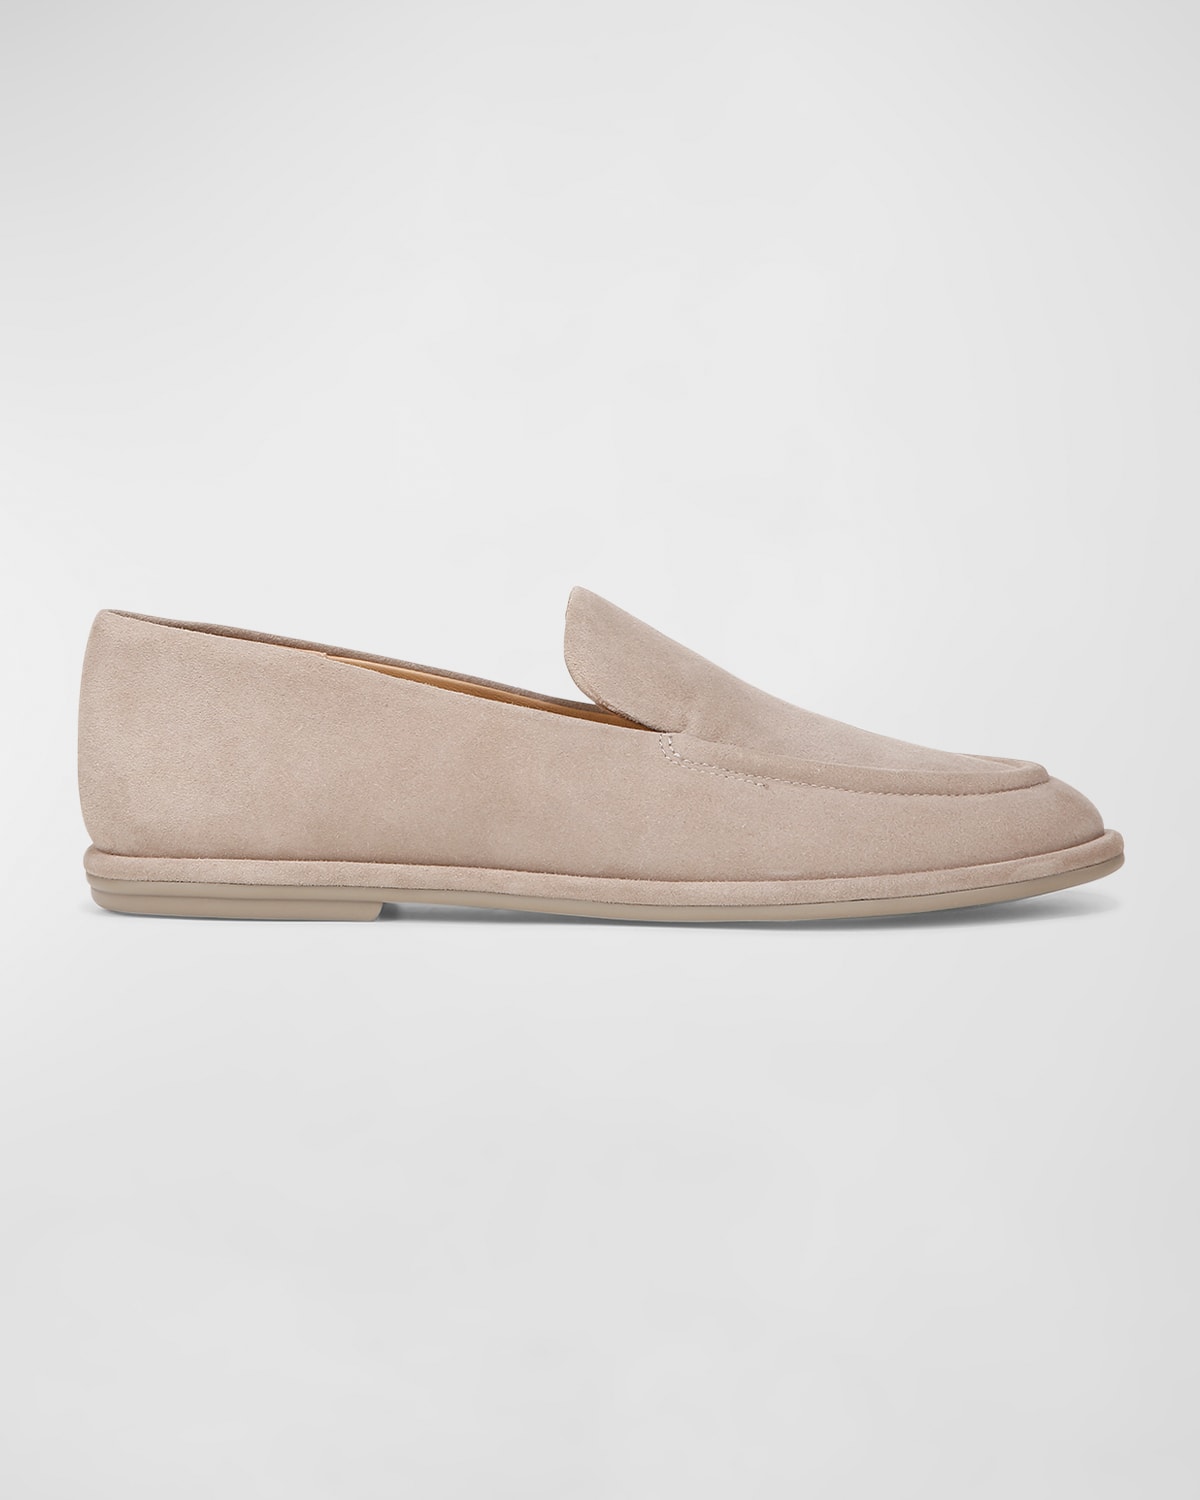 Sloan Suede Classic Loafers